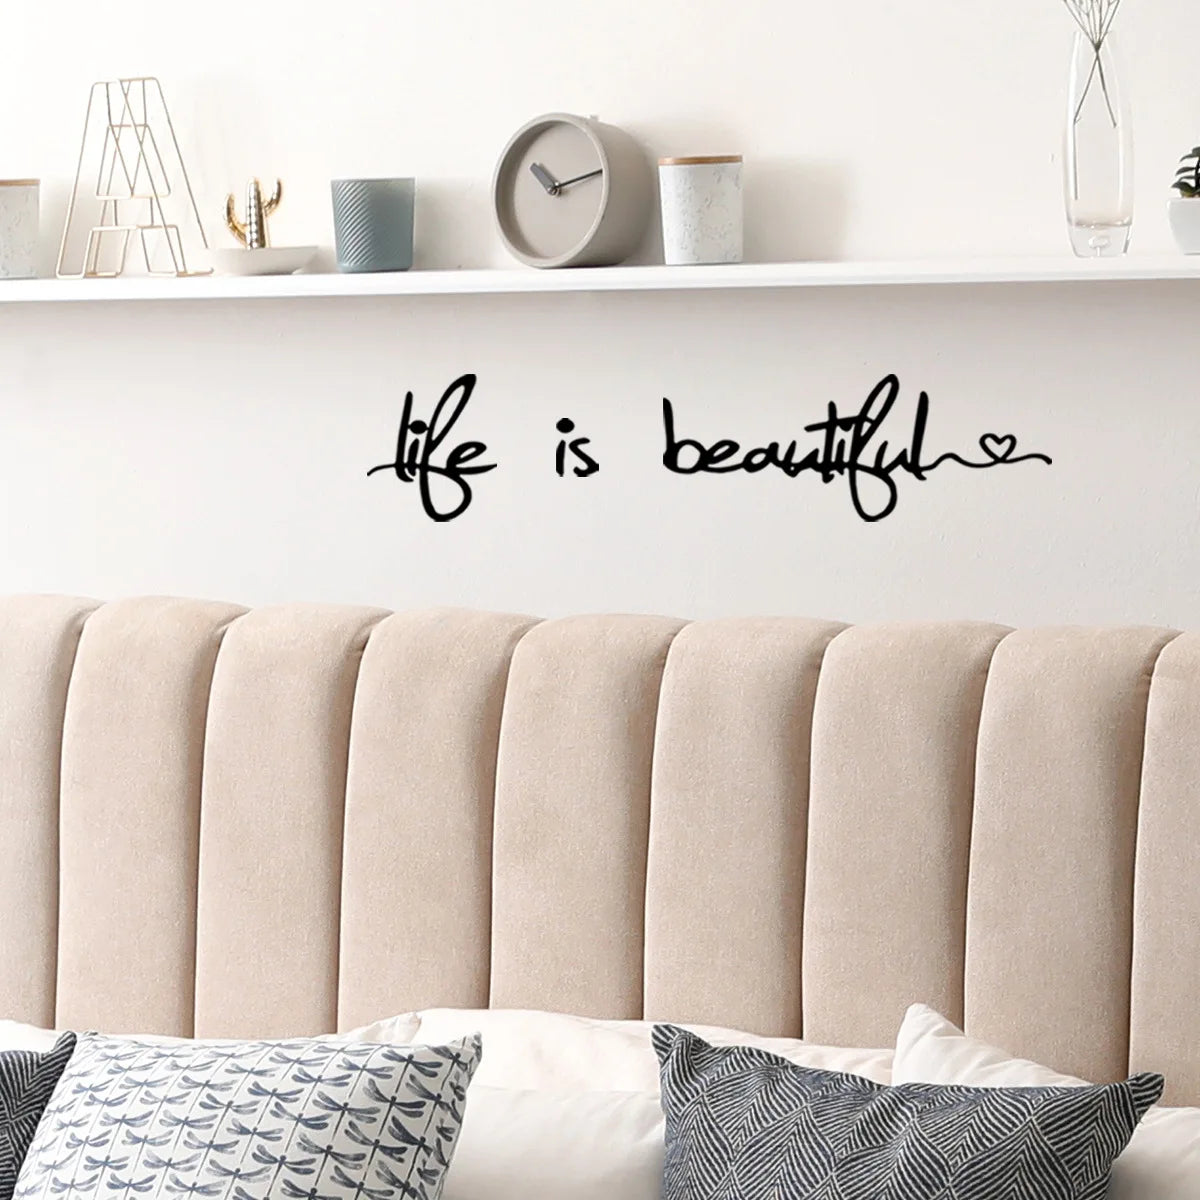 Beautiful Life Inspirational Wall Sticker Removable Peel and Stick Daily Mantra Wall Decal Creative DIY Home Decor For Living Room Bedroom Dining Room